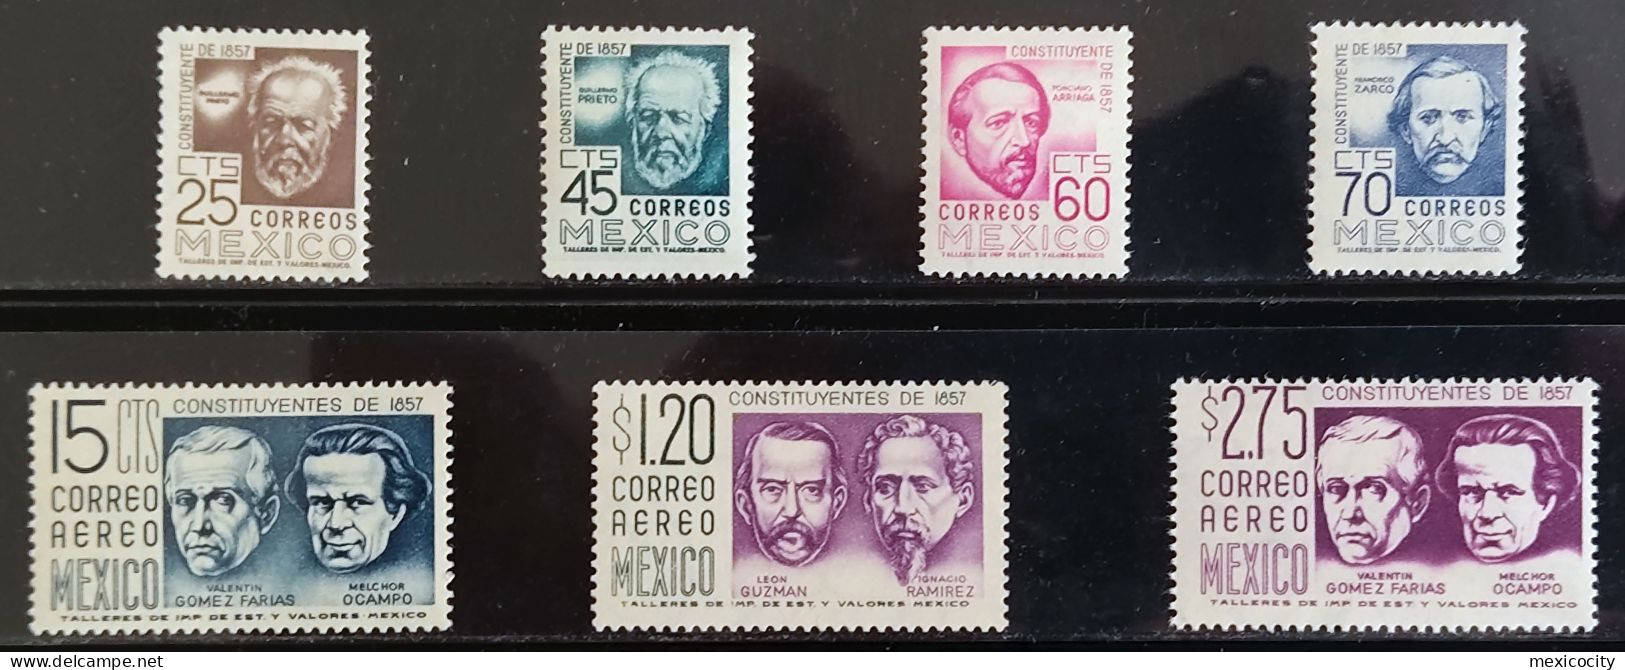 MEXICO 1957 - 1857 CONSTITUTION Centy. Set Scott 897A-900 & C236-C237A Mint Unmounted MNH, Nice & Rather Scarce Set Thus - Mexiko